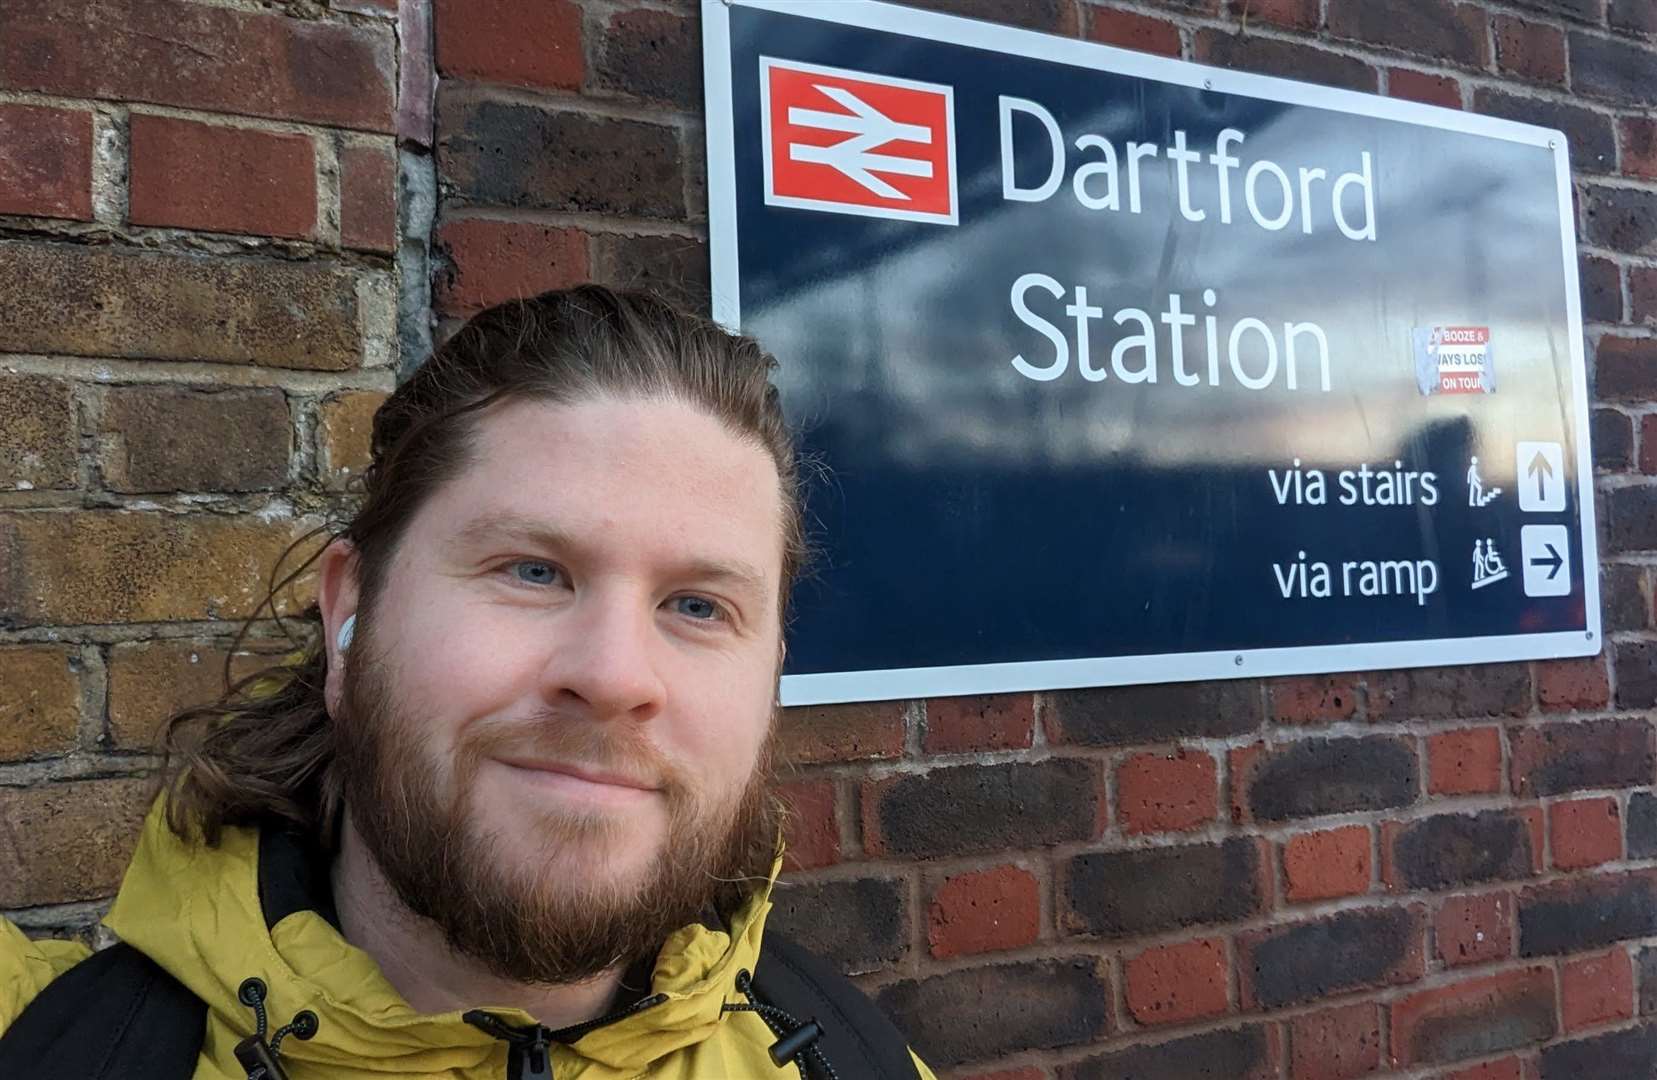 Reporter Rhys Griffiths arrives in Dartford for his bus ride across Kent